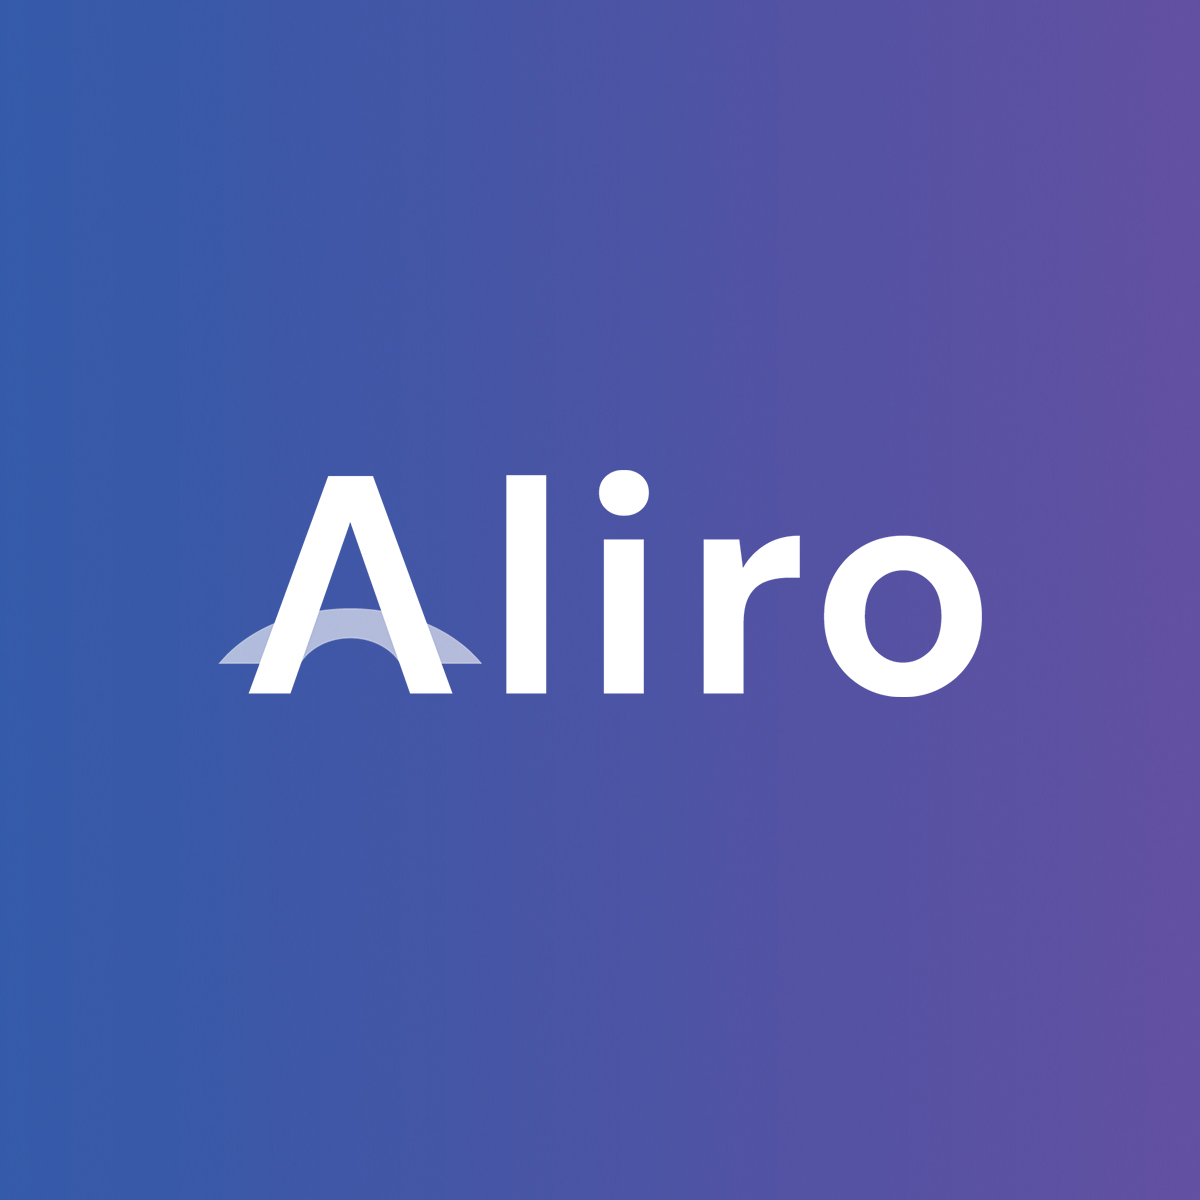 Aliro Immigration - The New Way to Get a Visa